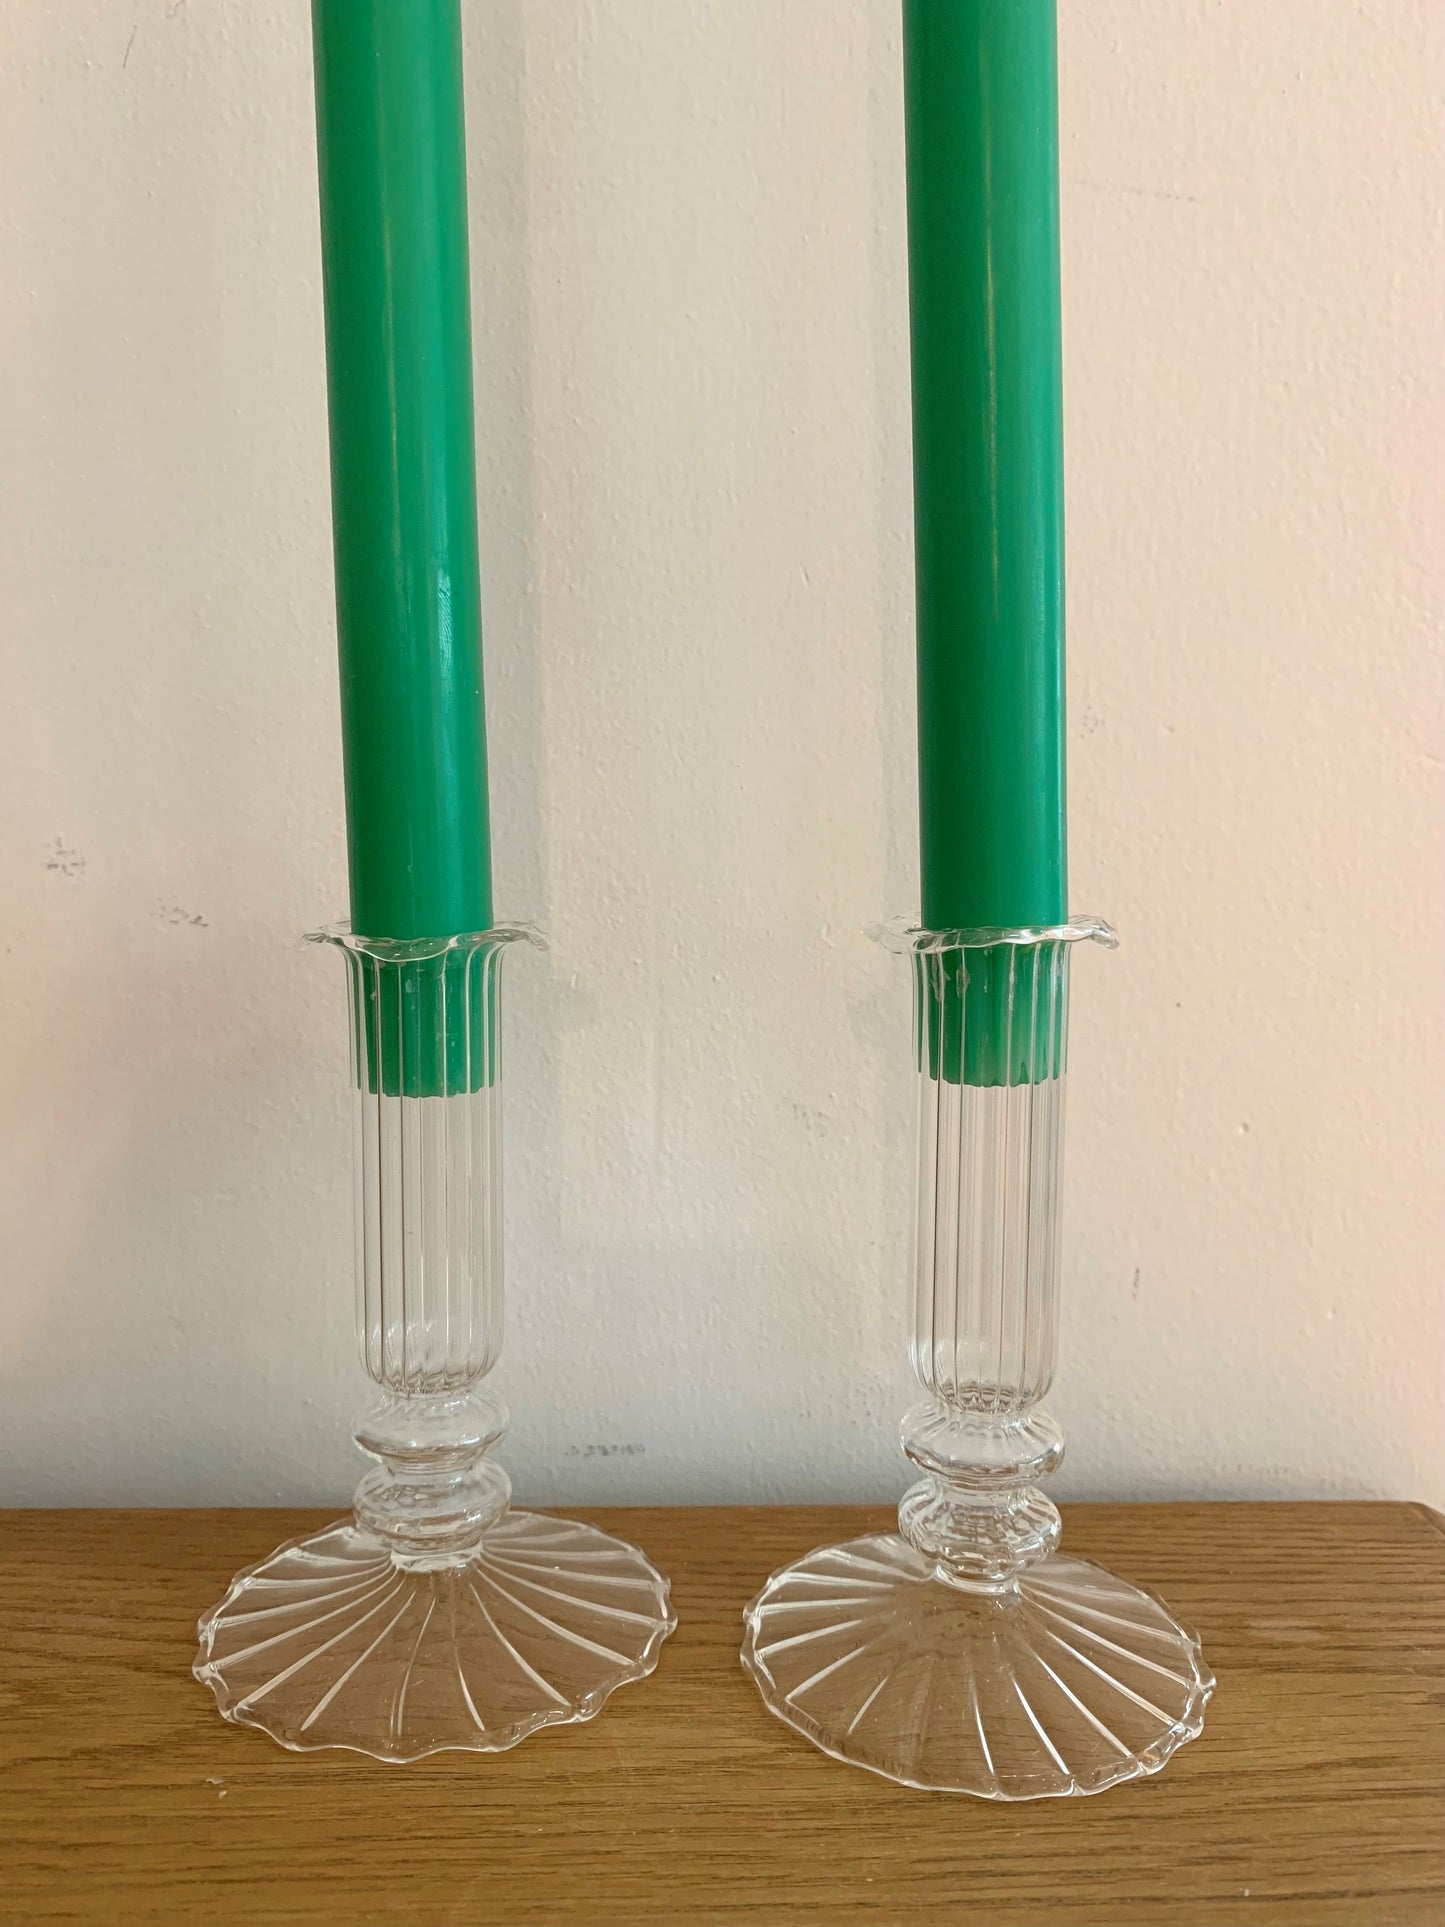 A pair of glass cande holders with two green candles